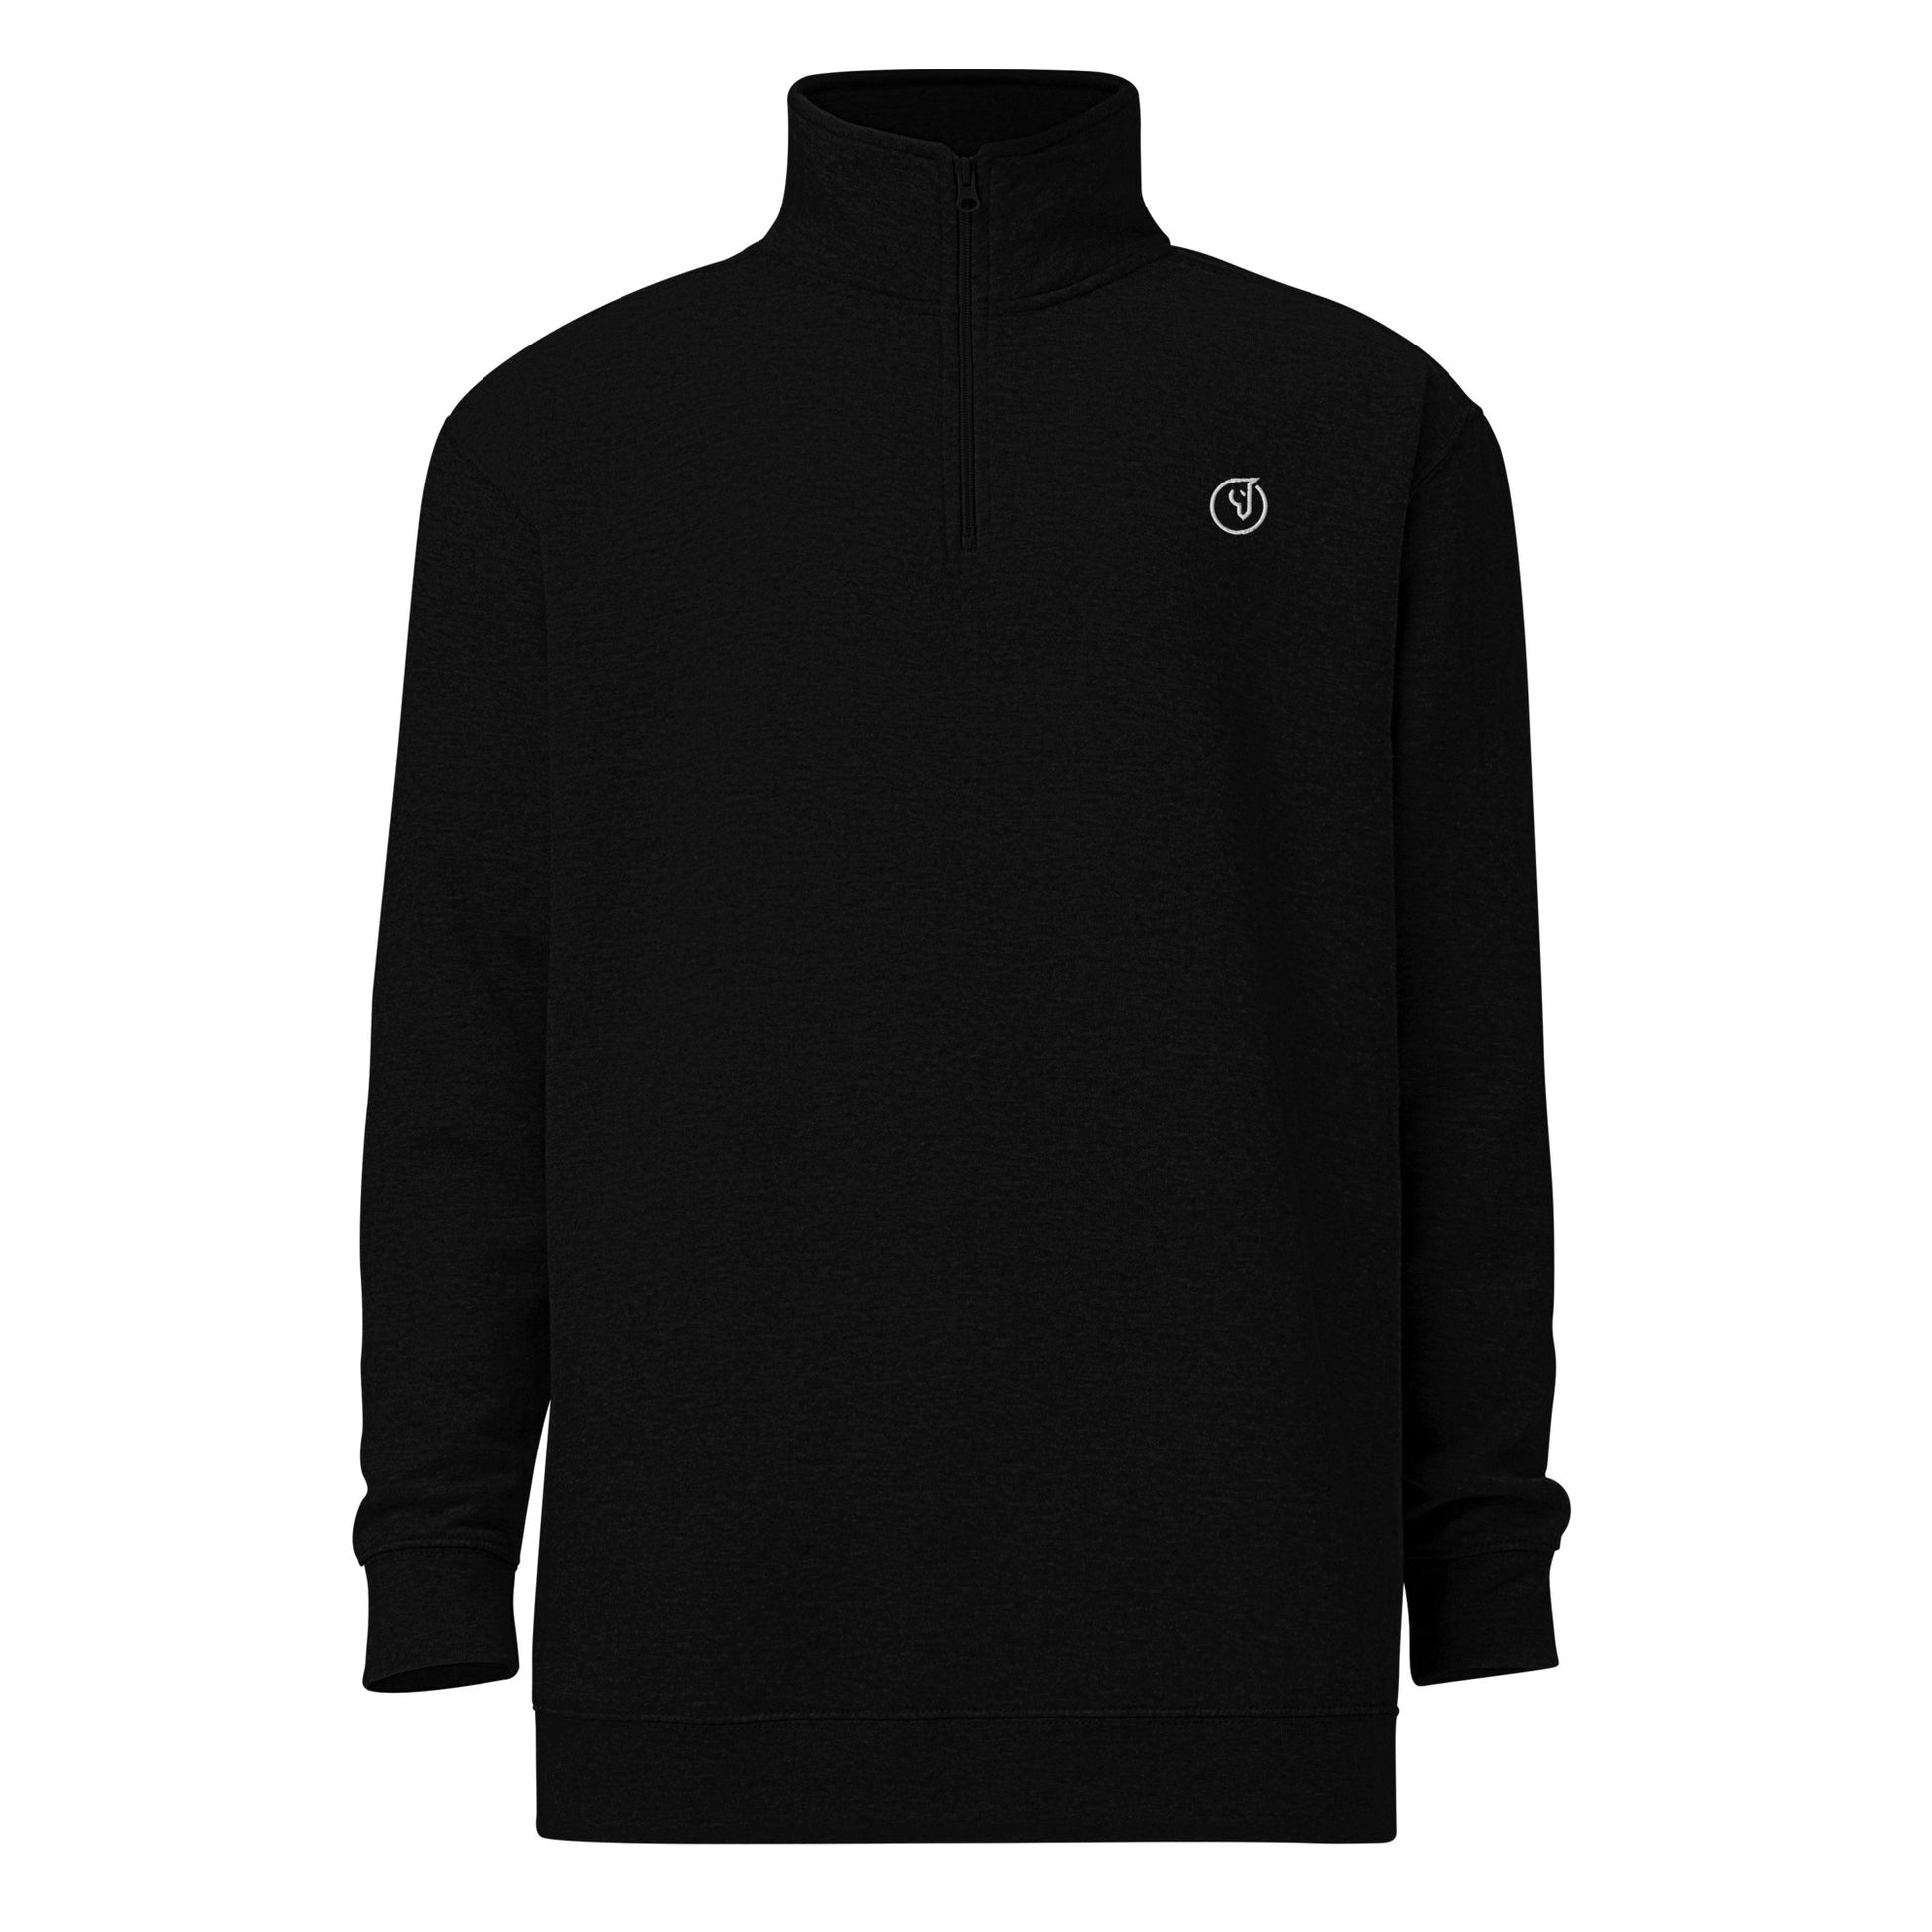 Humble Sportswear, embroidered fleece pullover, men’s fleece pullover, soft fleece pullover, men’s jackets